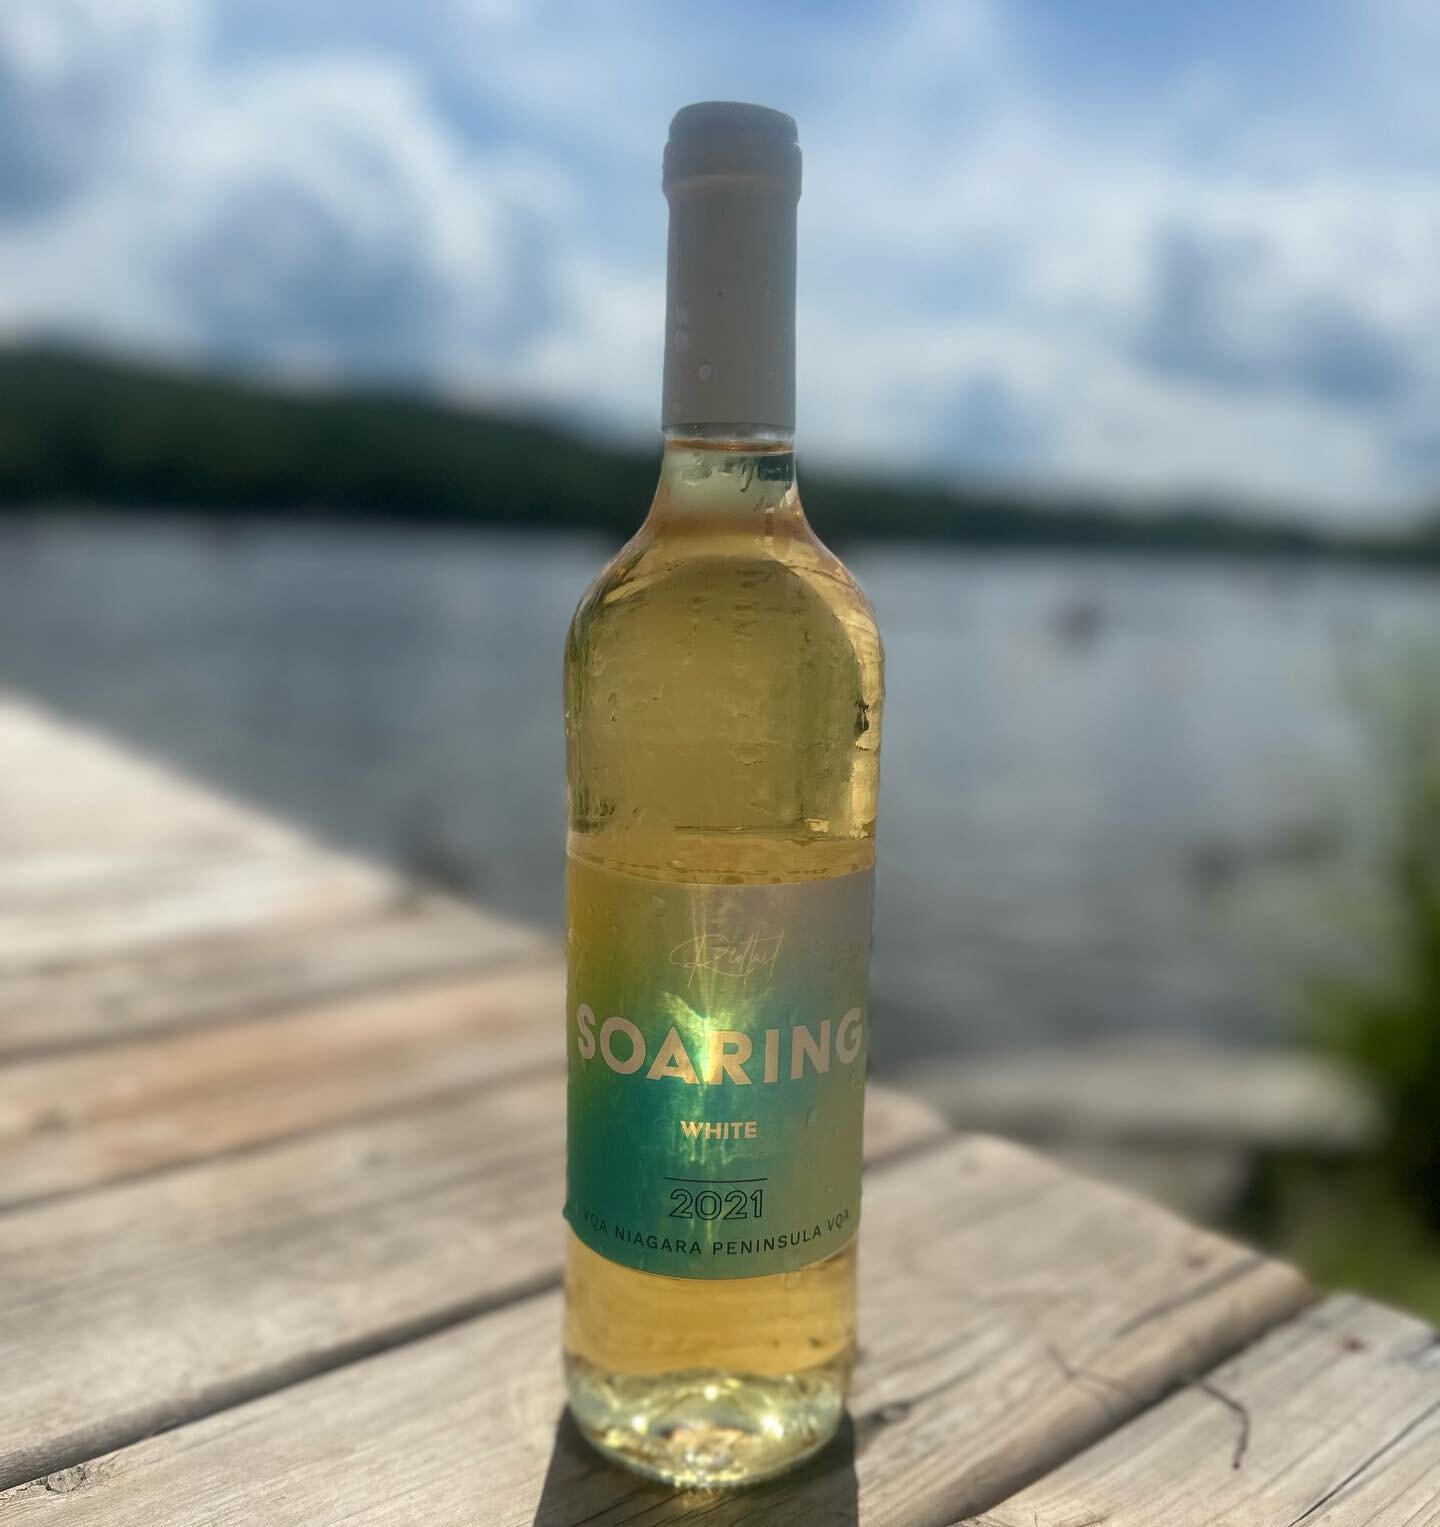 Introducing part 1/2 of Redtail&rsquo;s NEW Soaring Series!! 🥂

The Soaring&rsquo;s are a special representation of our team &amp; what makes us Redtail Vineyards! &hearts;️

Our 2021 Soaring White displays richness &amp; boasts flavours of ripe pea